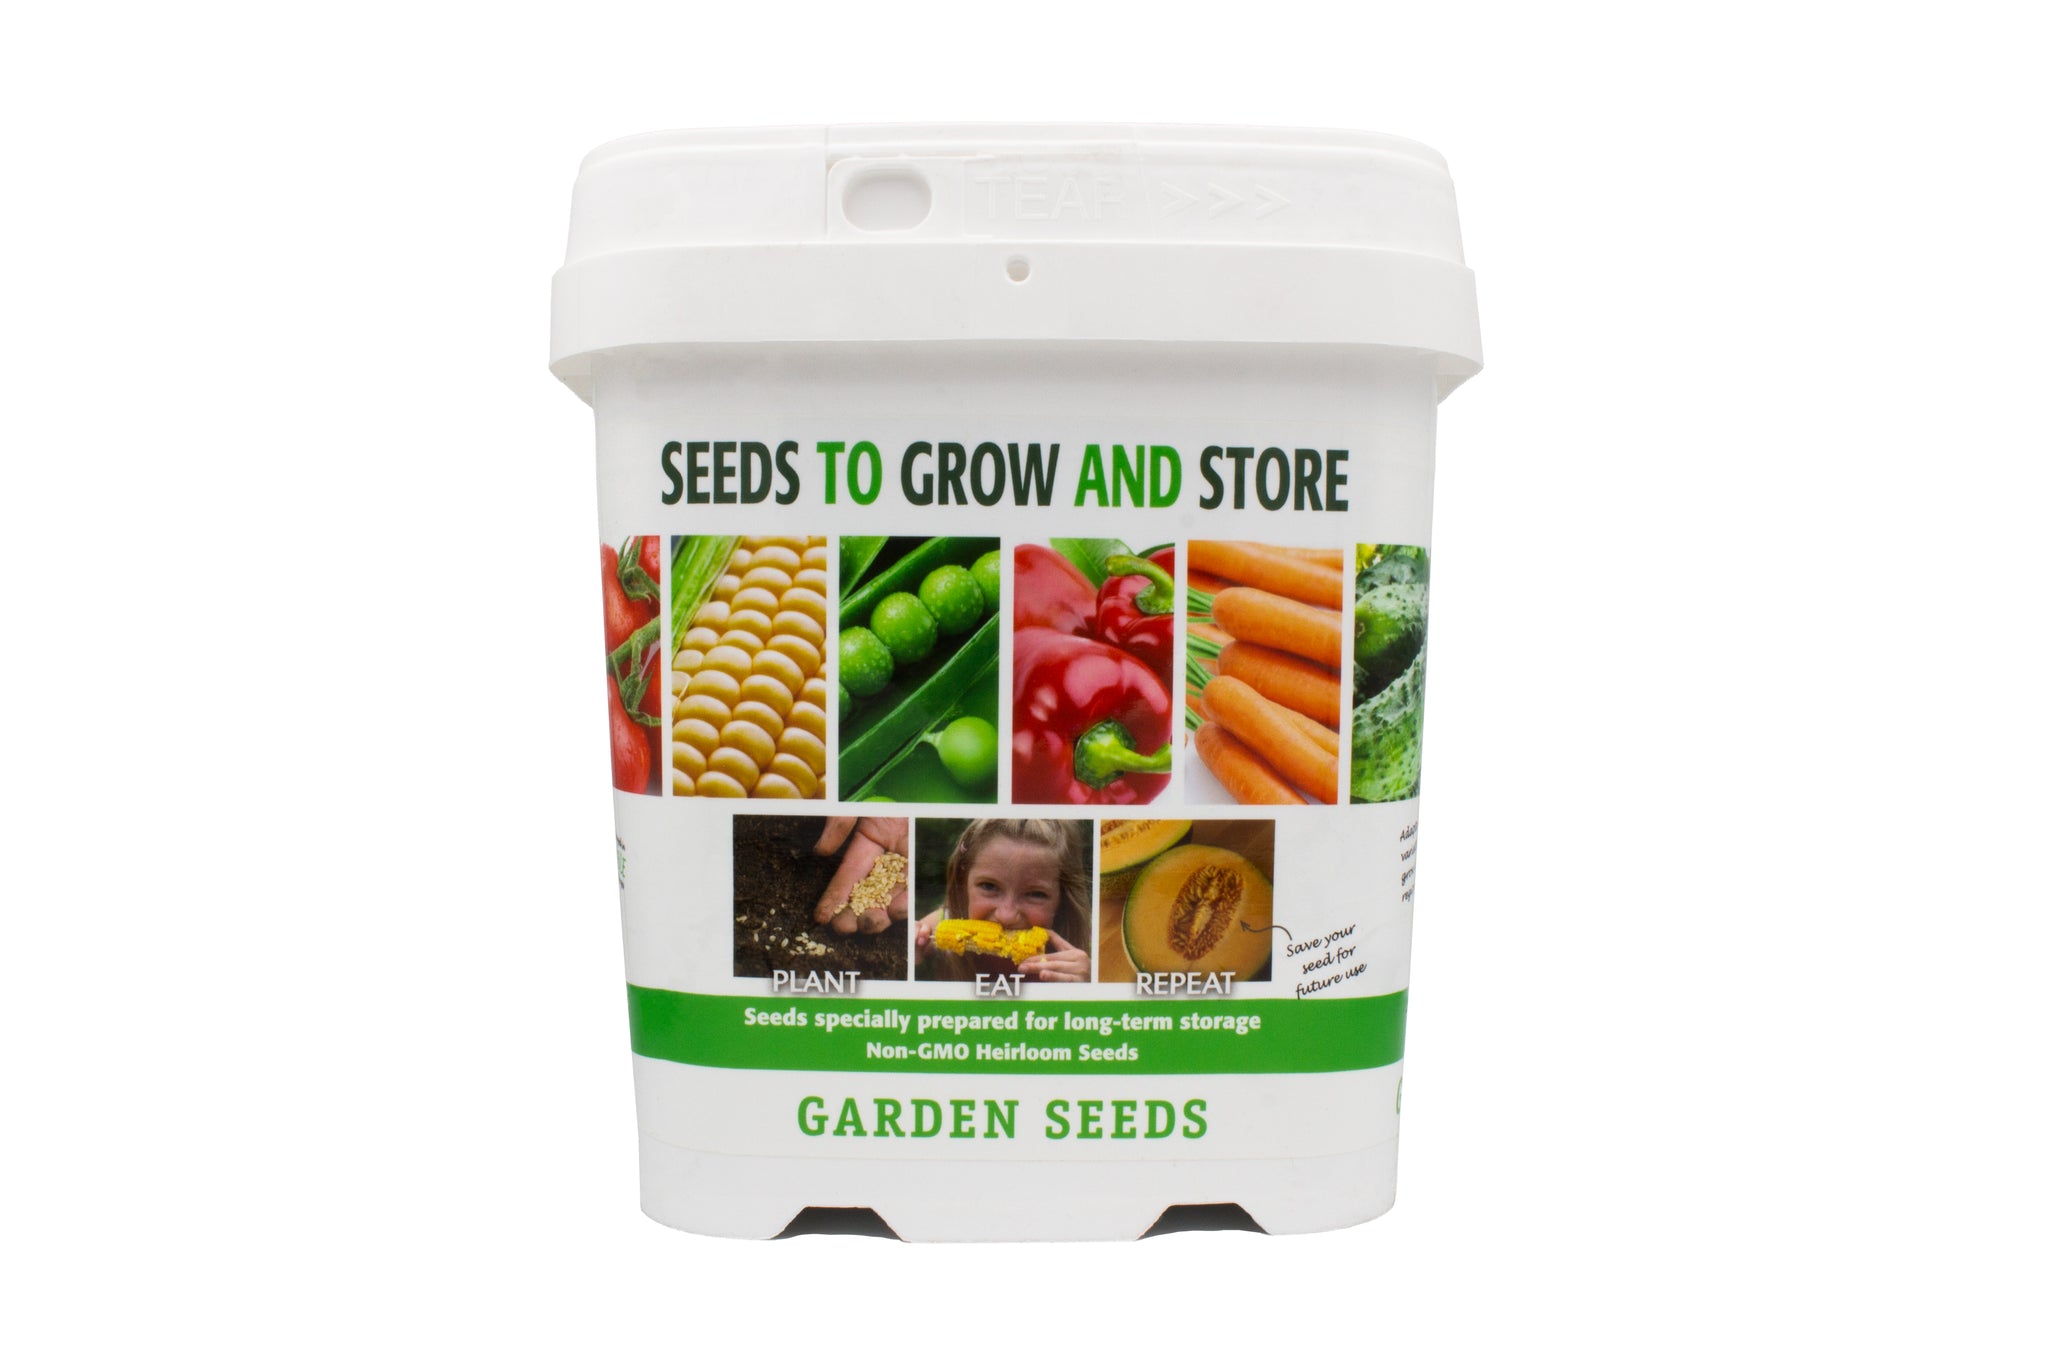 Seed Storage  How to Store Seeds Long Term - Valley Food Storage